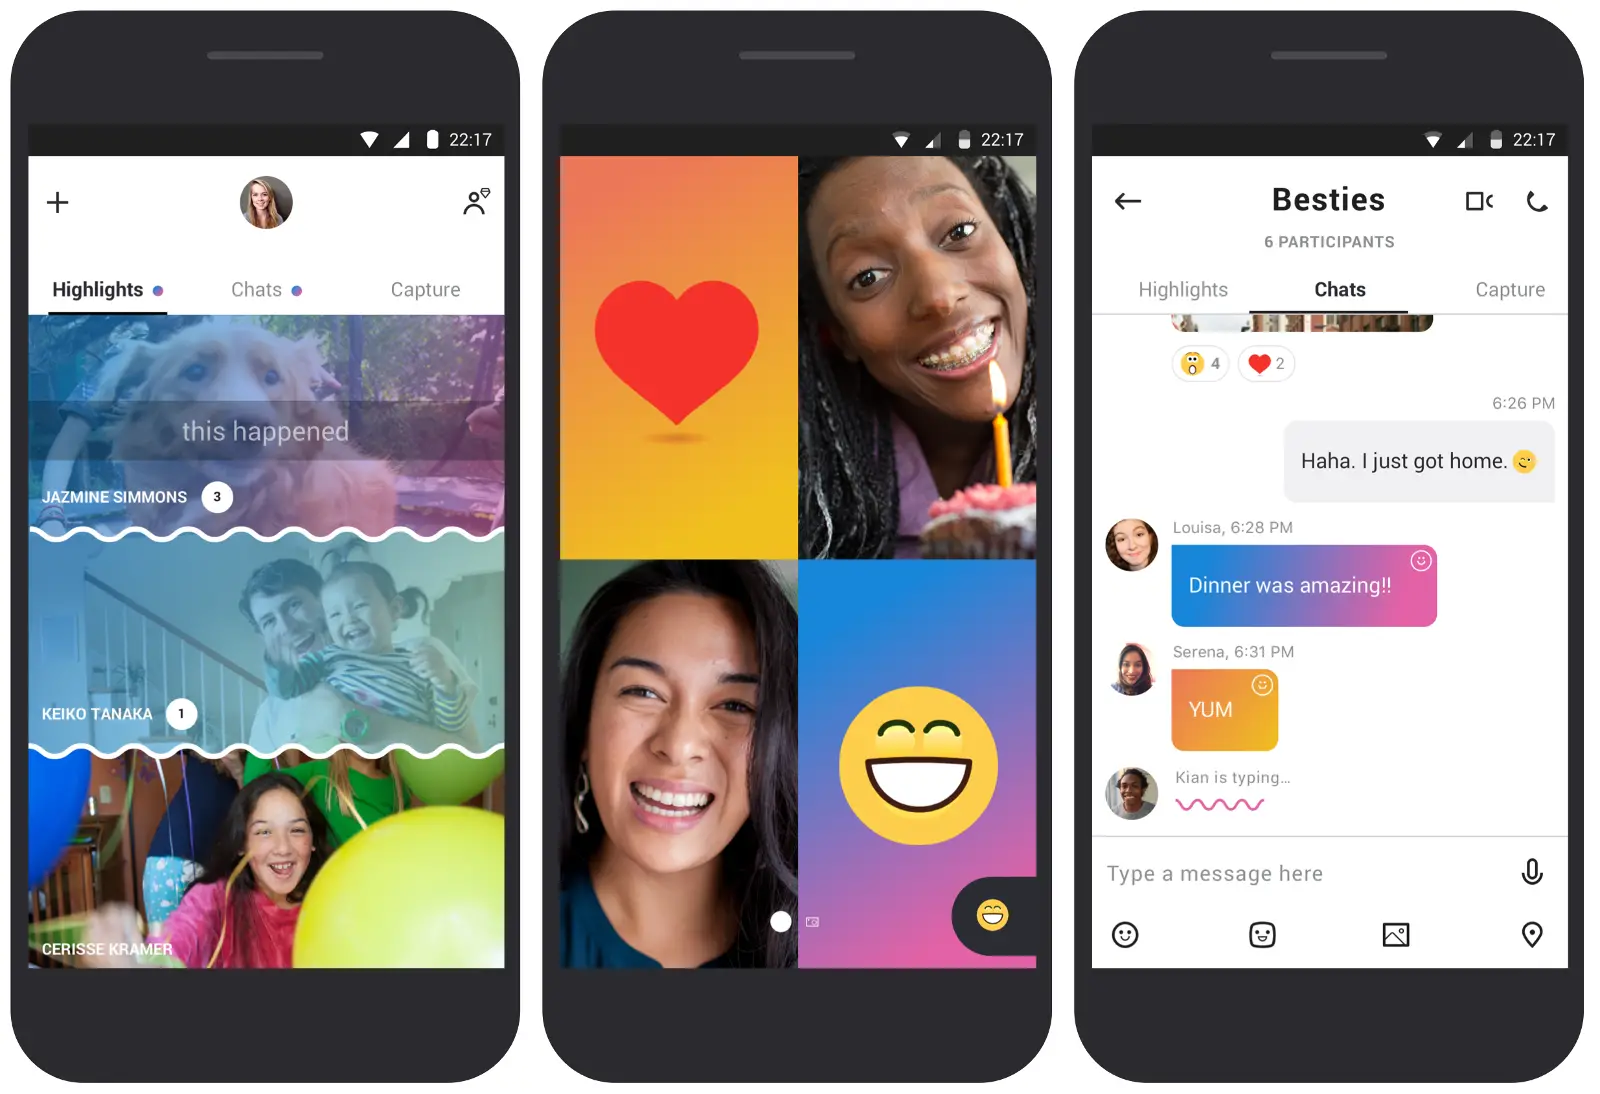 Skype's Snapchat-like redesign is now available for Android - Phandroid